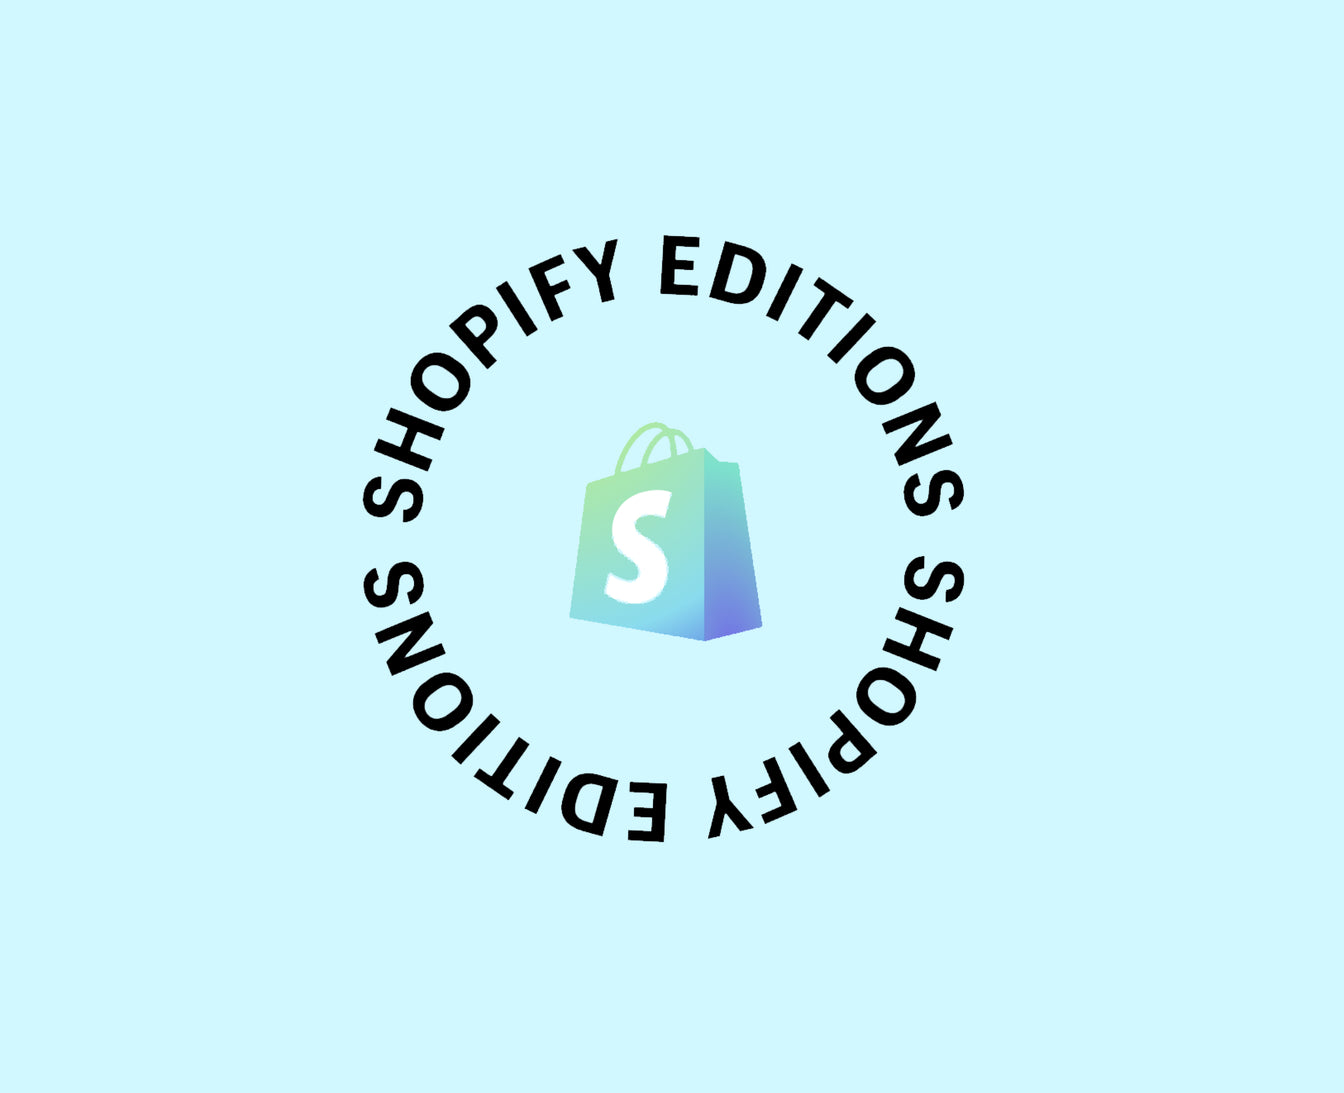 Shopify Editions  Summer '22 - Shopify USA